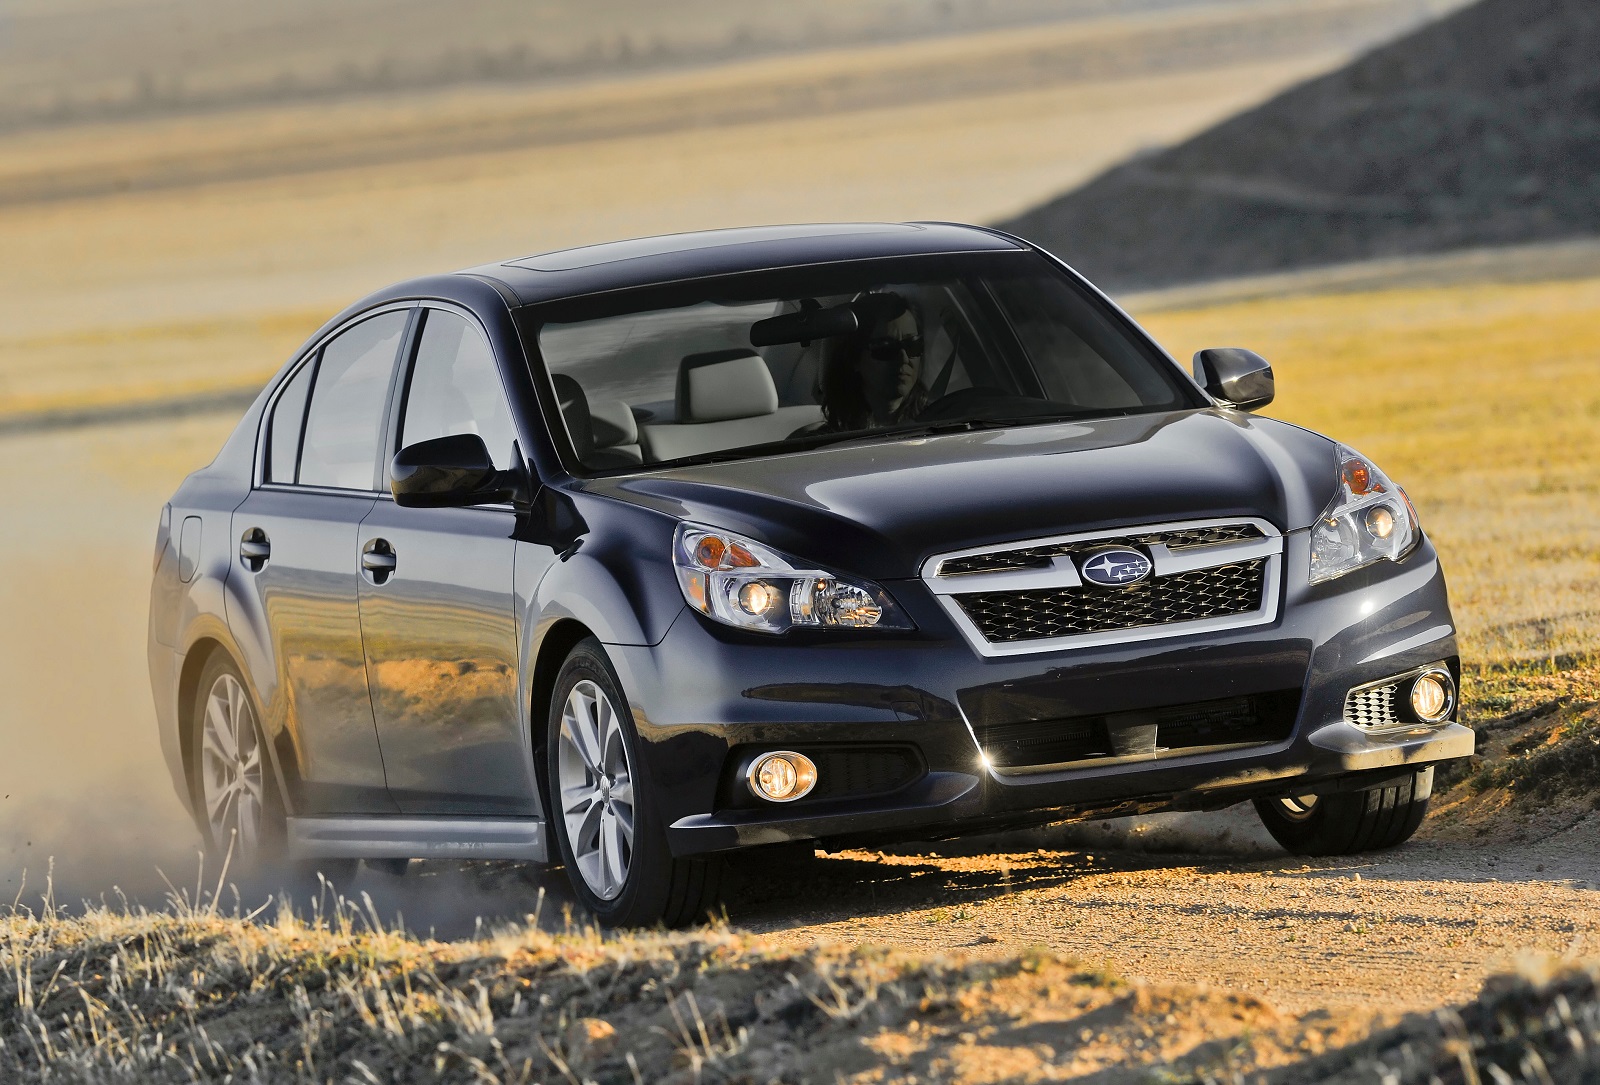 2014 Subaru Legacy Review, Ratings, Specs, Prices, and Photos - The Car